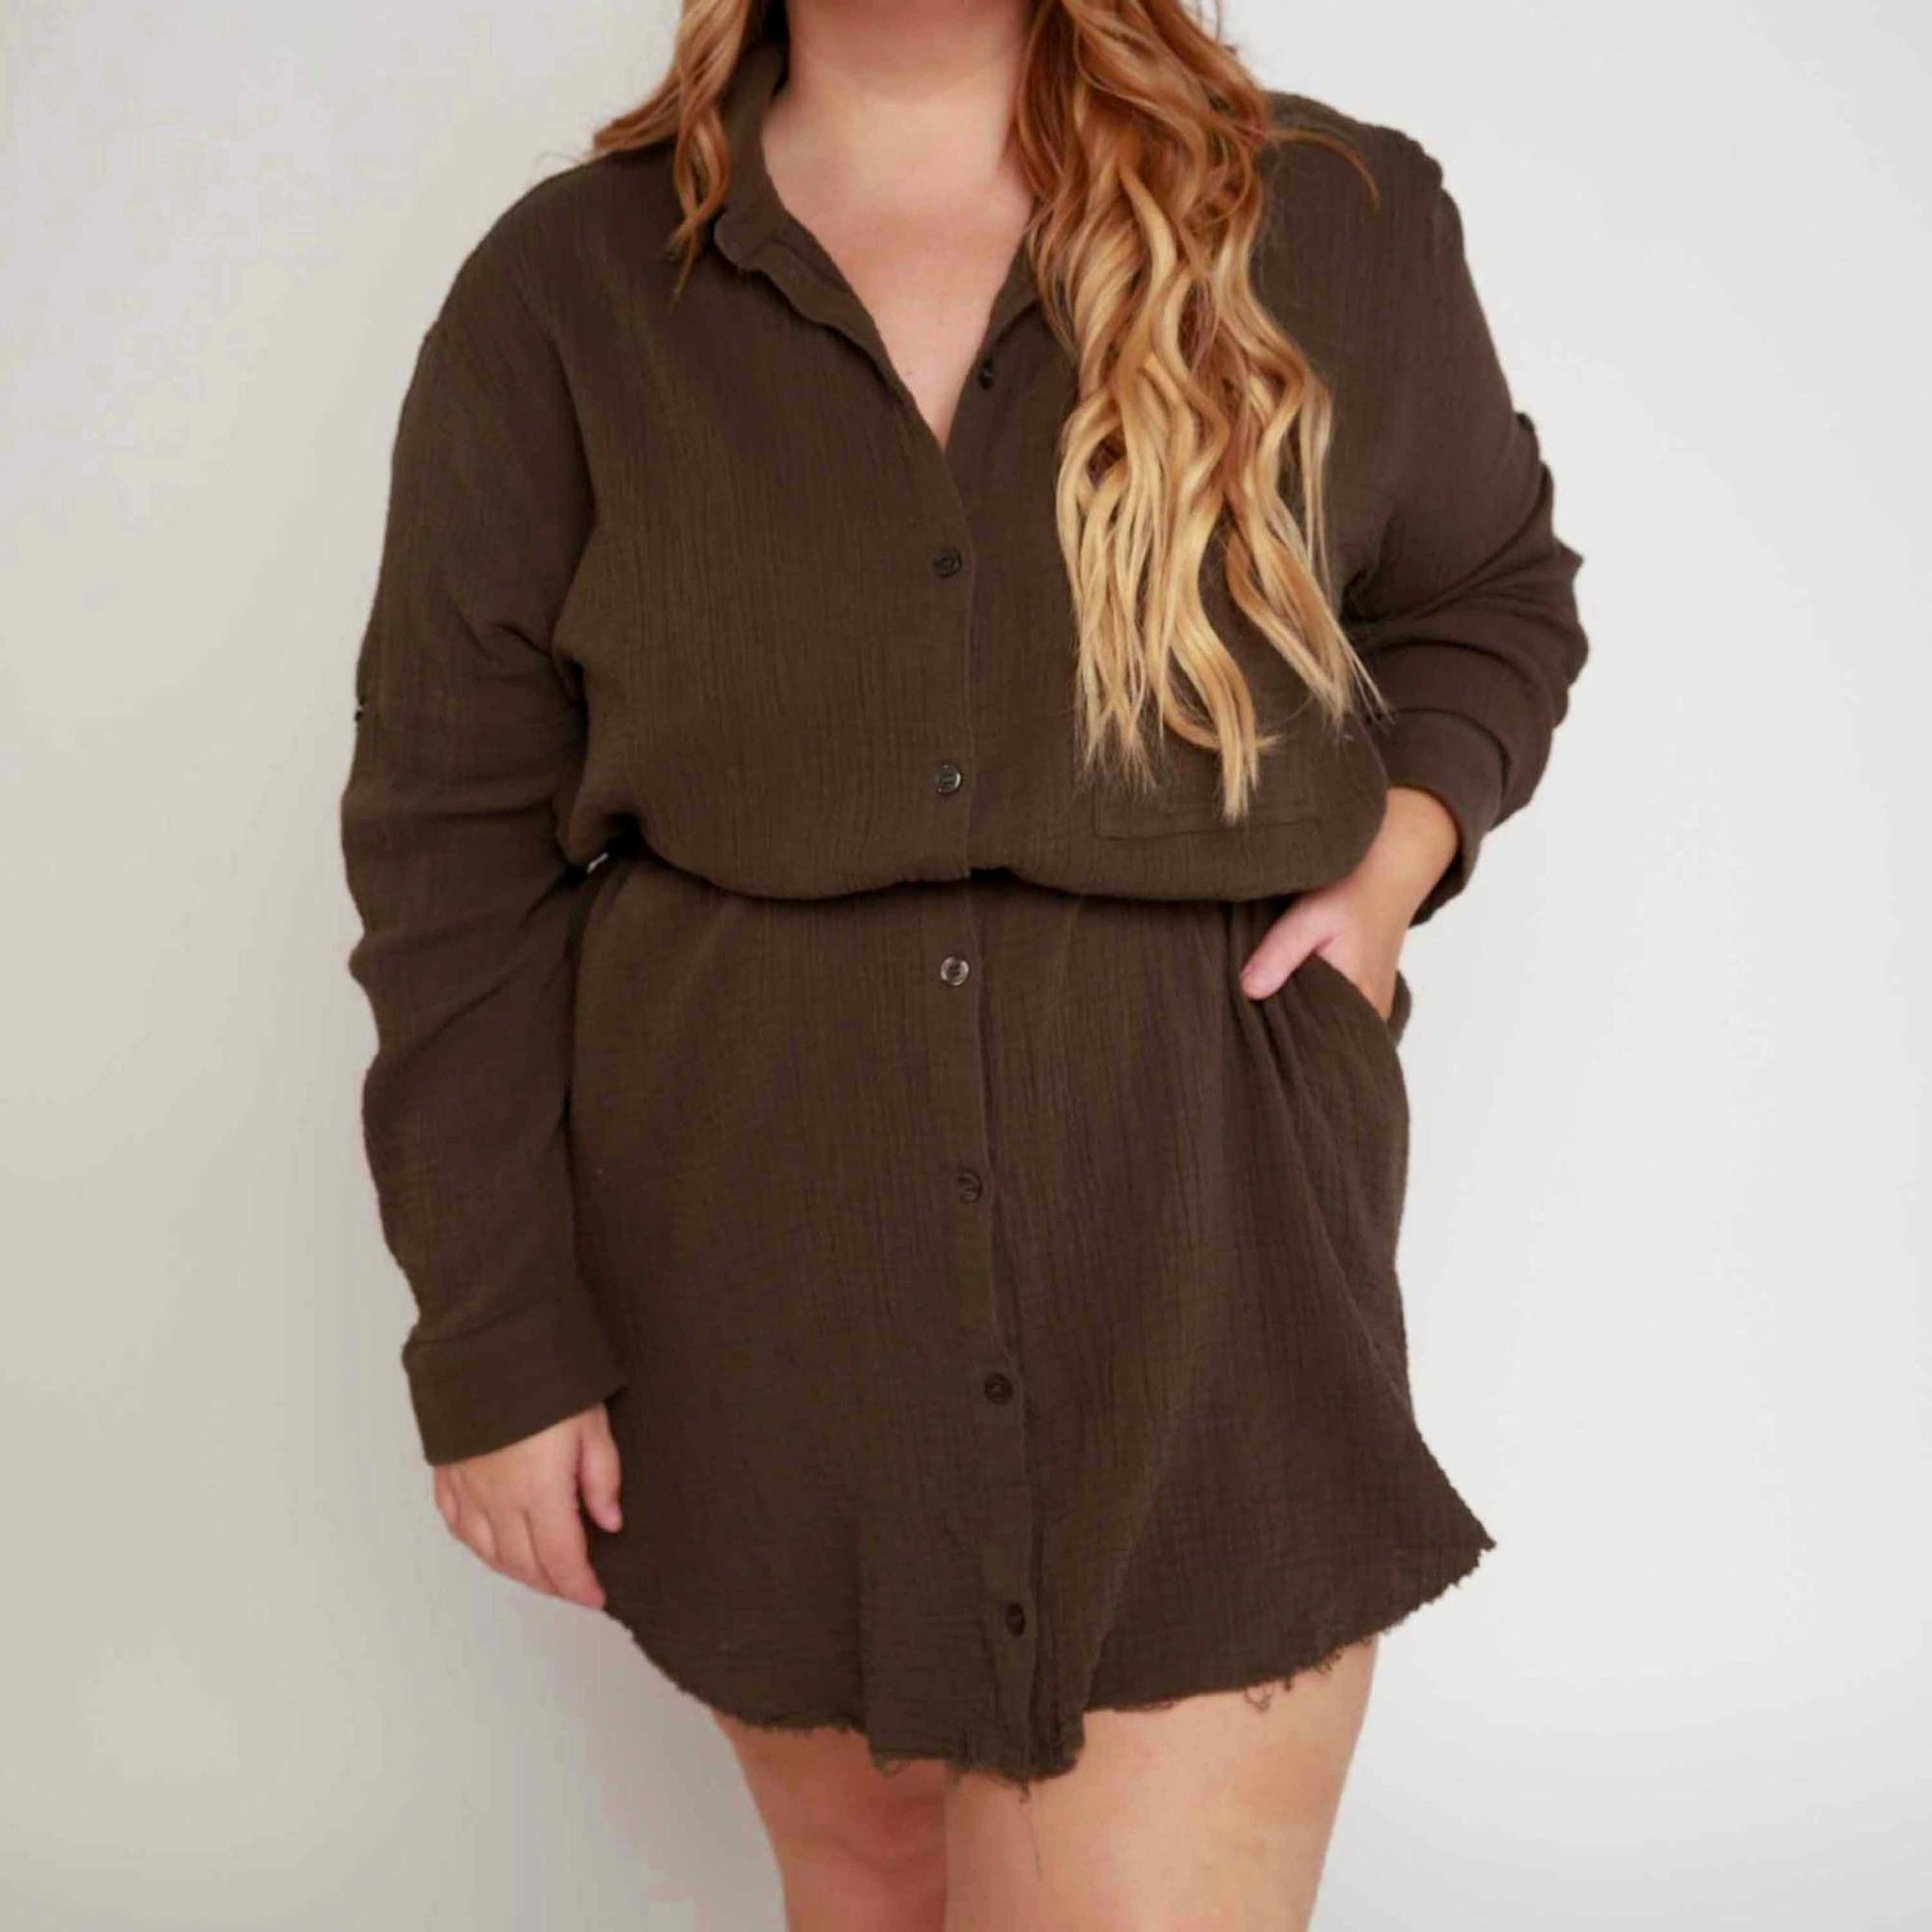 Olive Button Up Dress